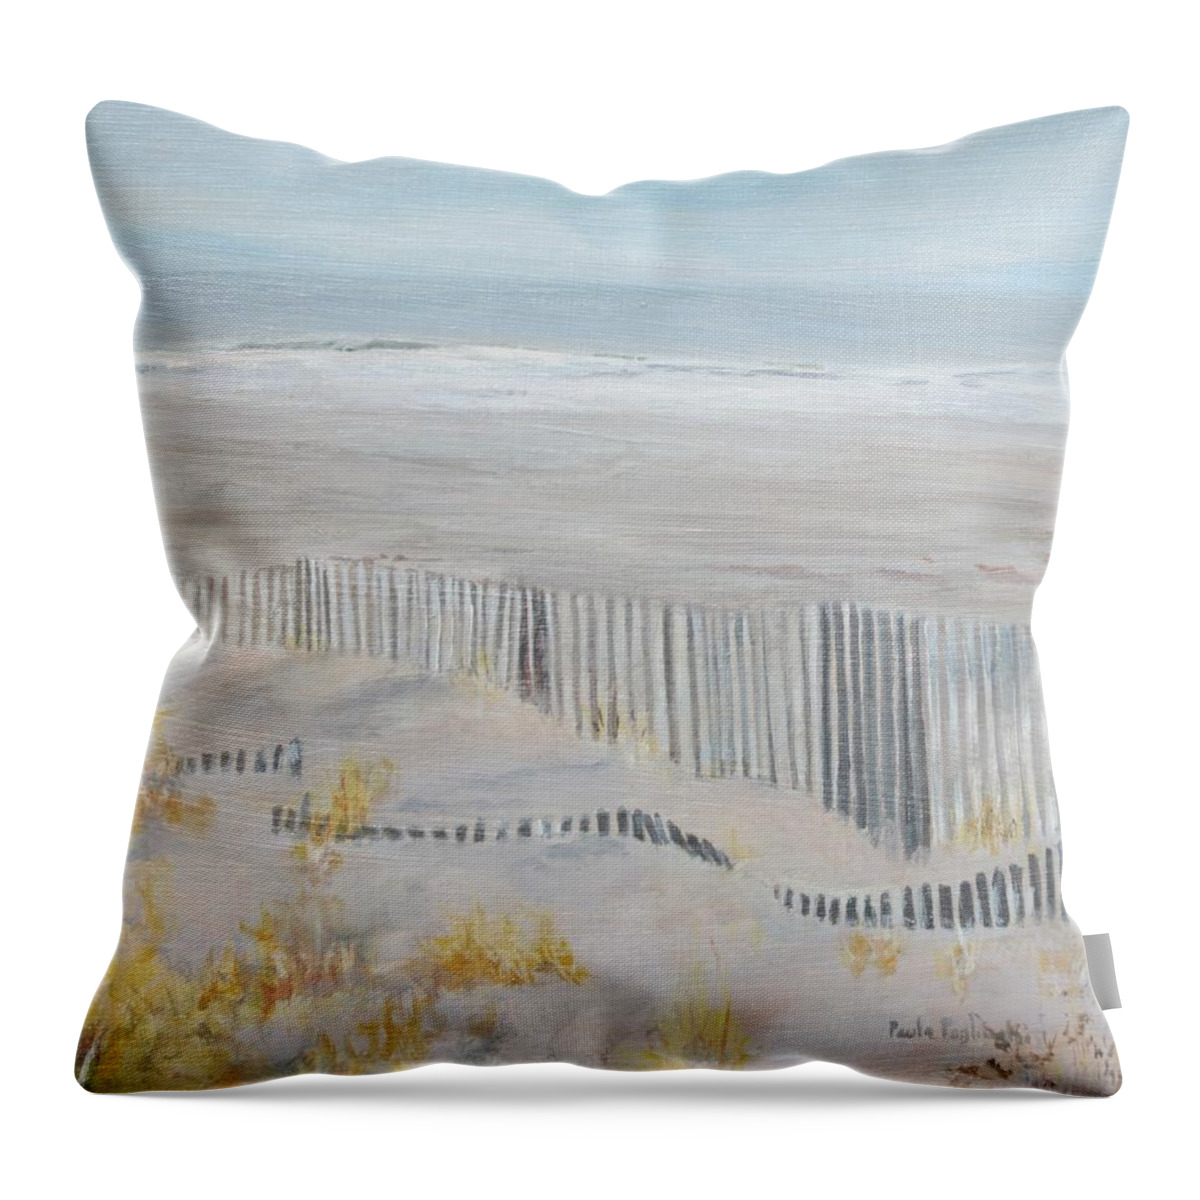 Avalon Throw Pillow featuring the painting Avalon Morning by Paula Pagliughi